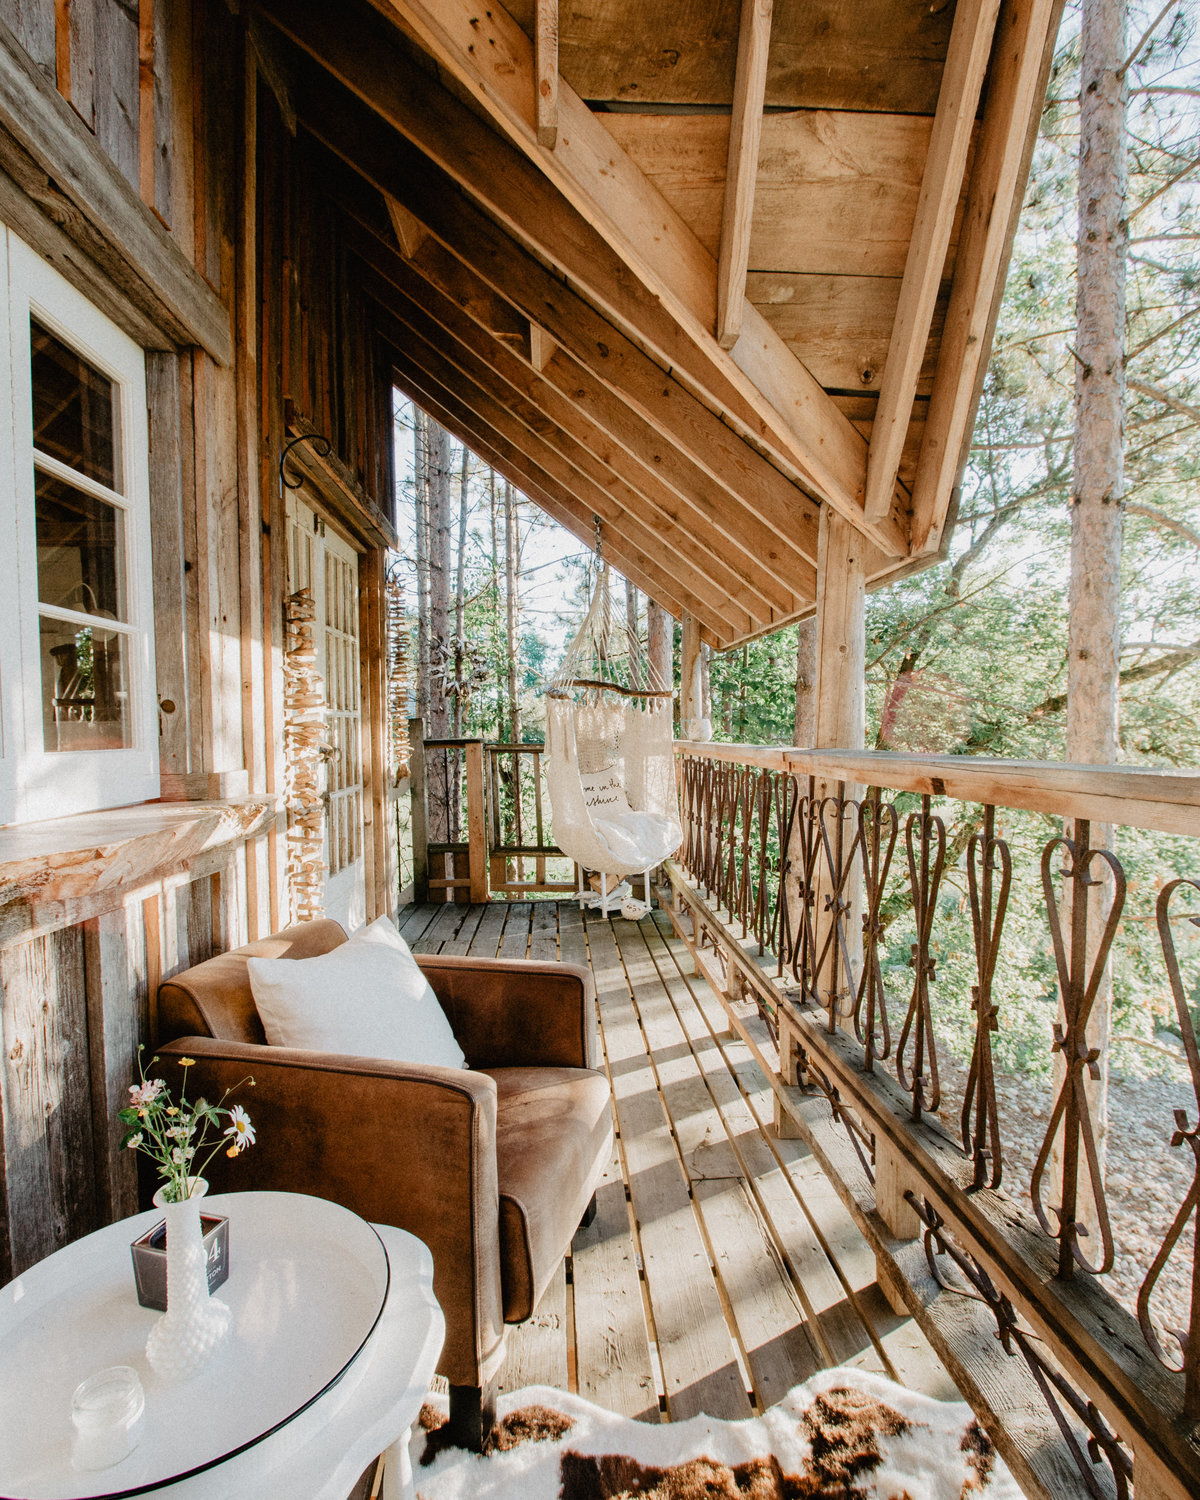 Treehouse and Cabin Retreat12